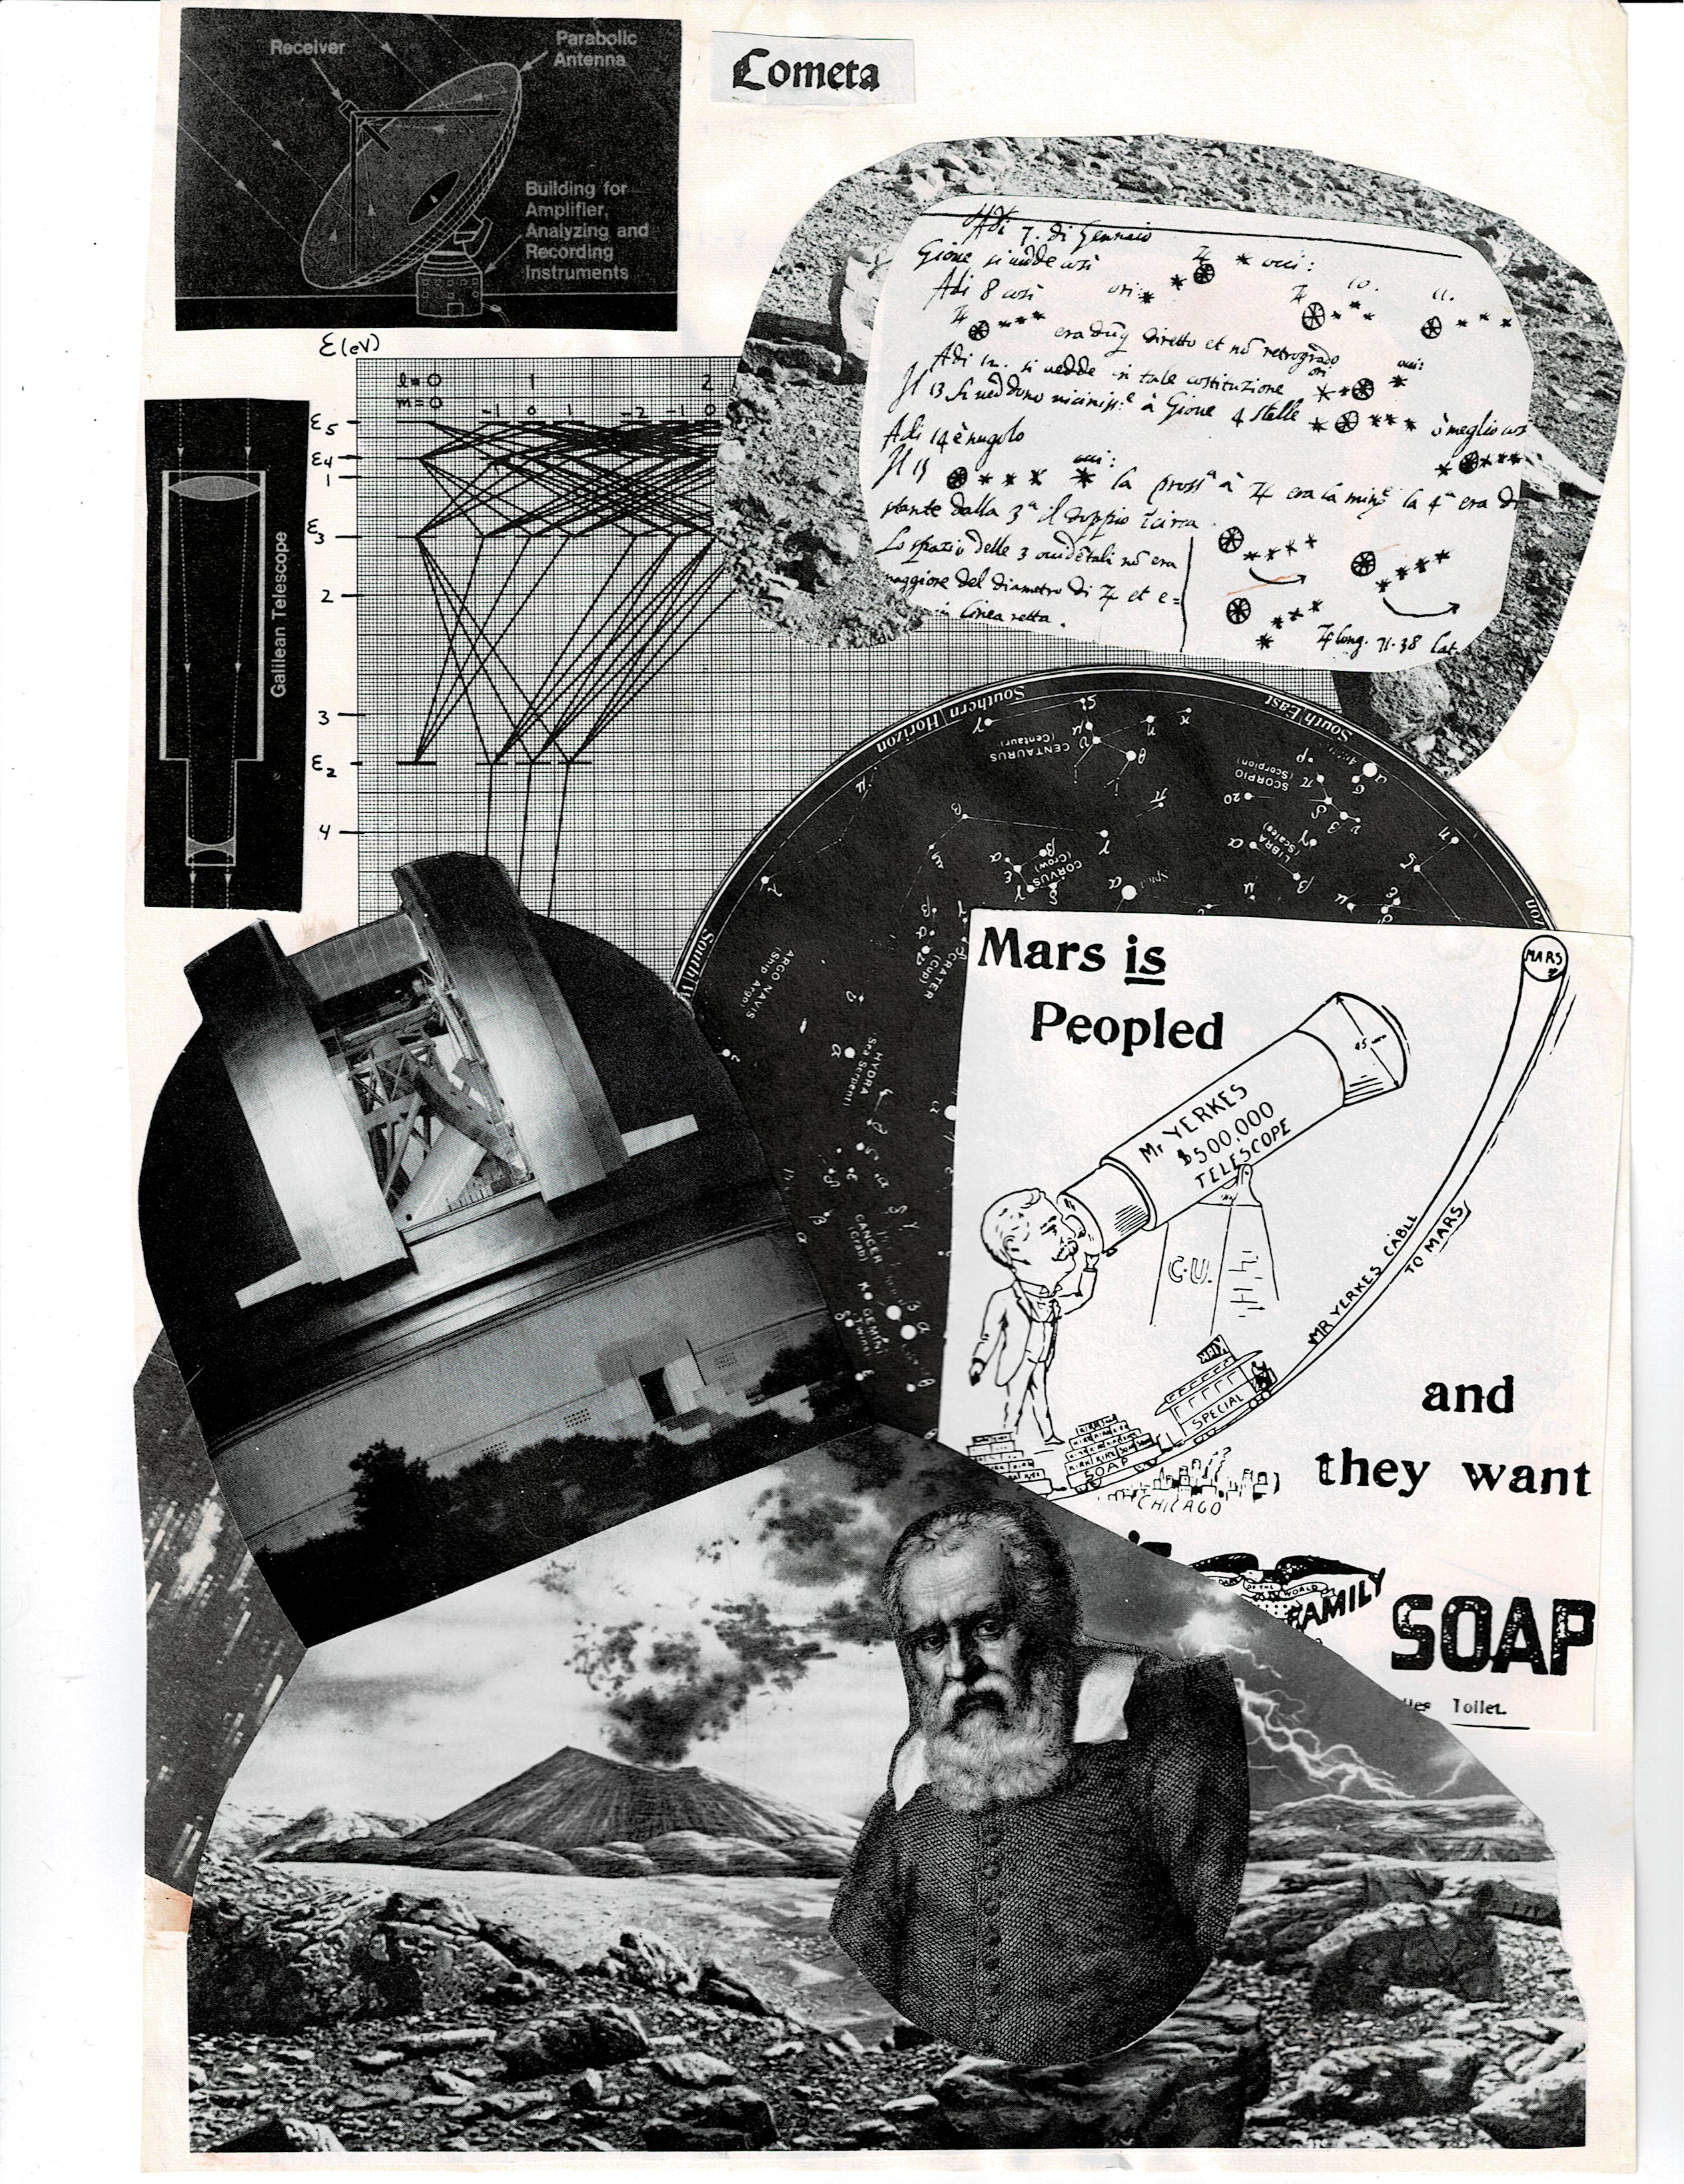 Assorted photographs and diagrams are jumbled together haphazardly on the page. An ad states: Mars is peopled, and they want soap! Galileo is hanging out with a volcano. Small text at the top says 'Cometa'.